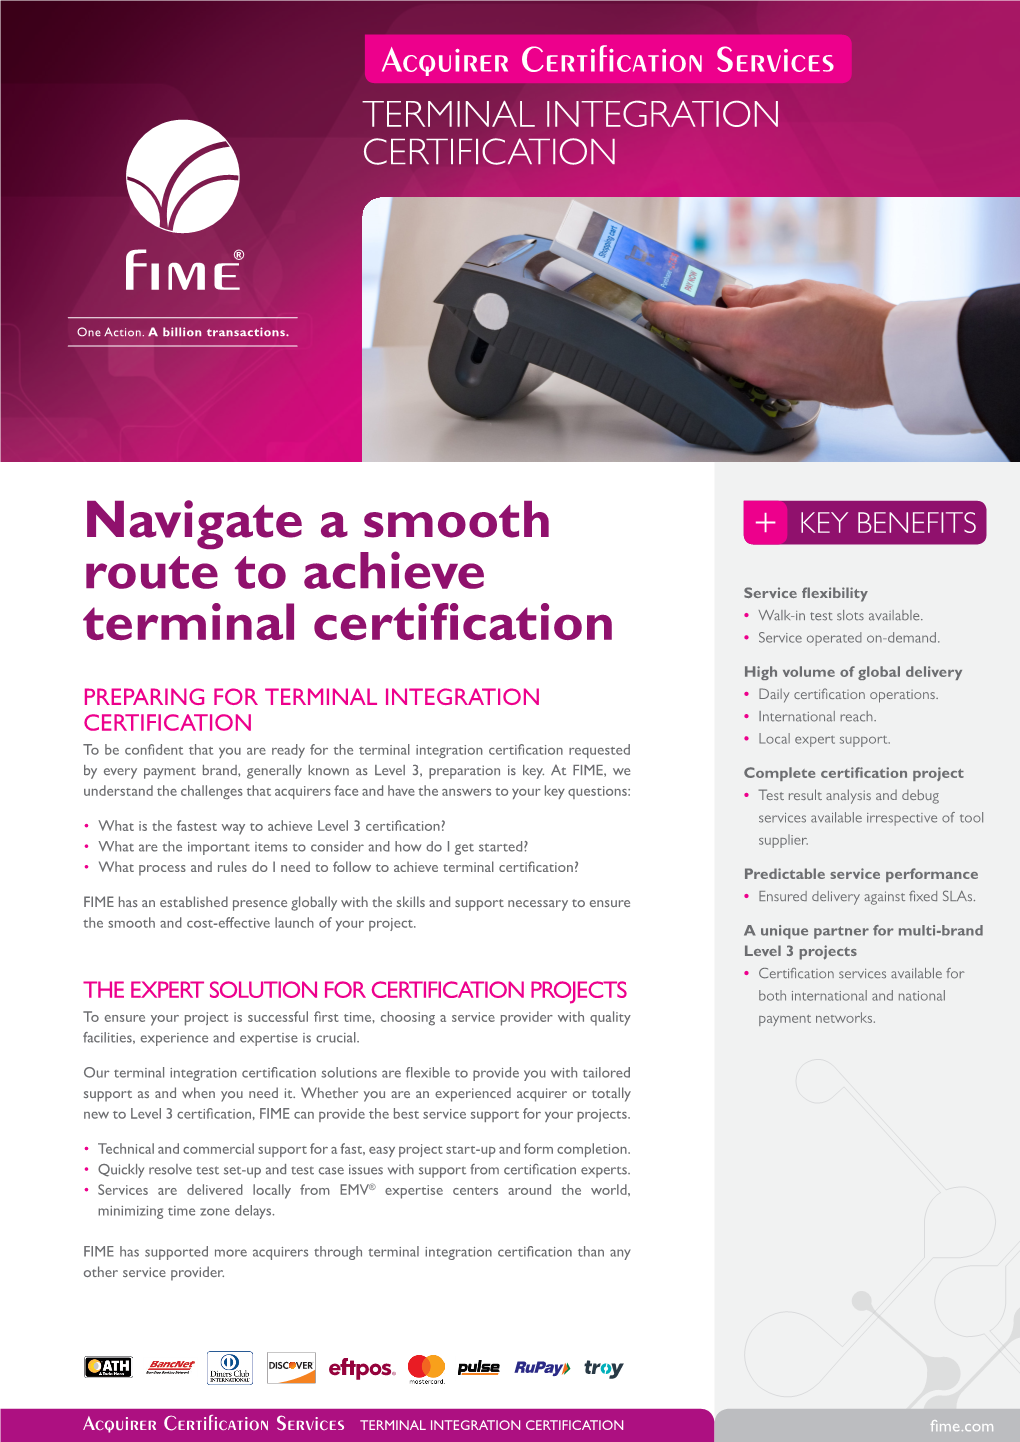 FIME Acquirer Certification Services